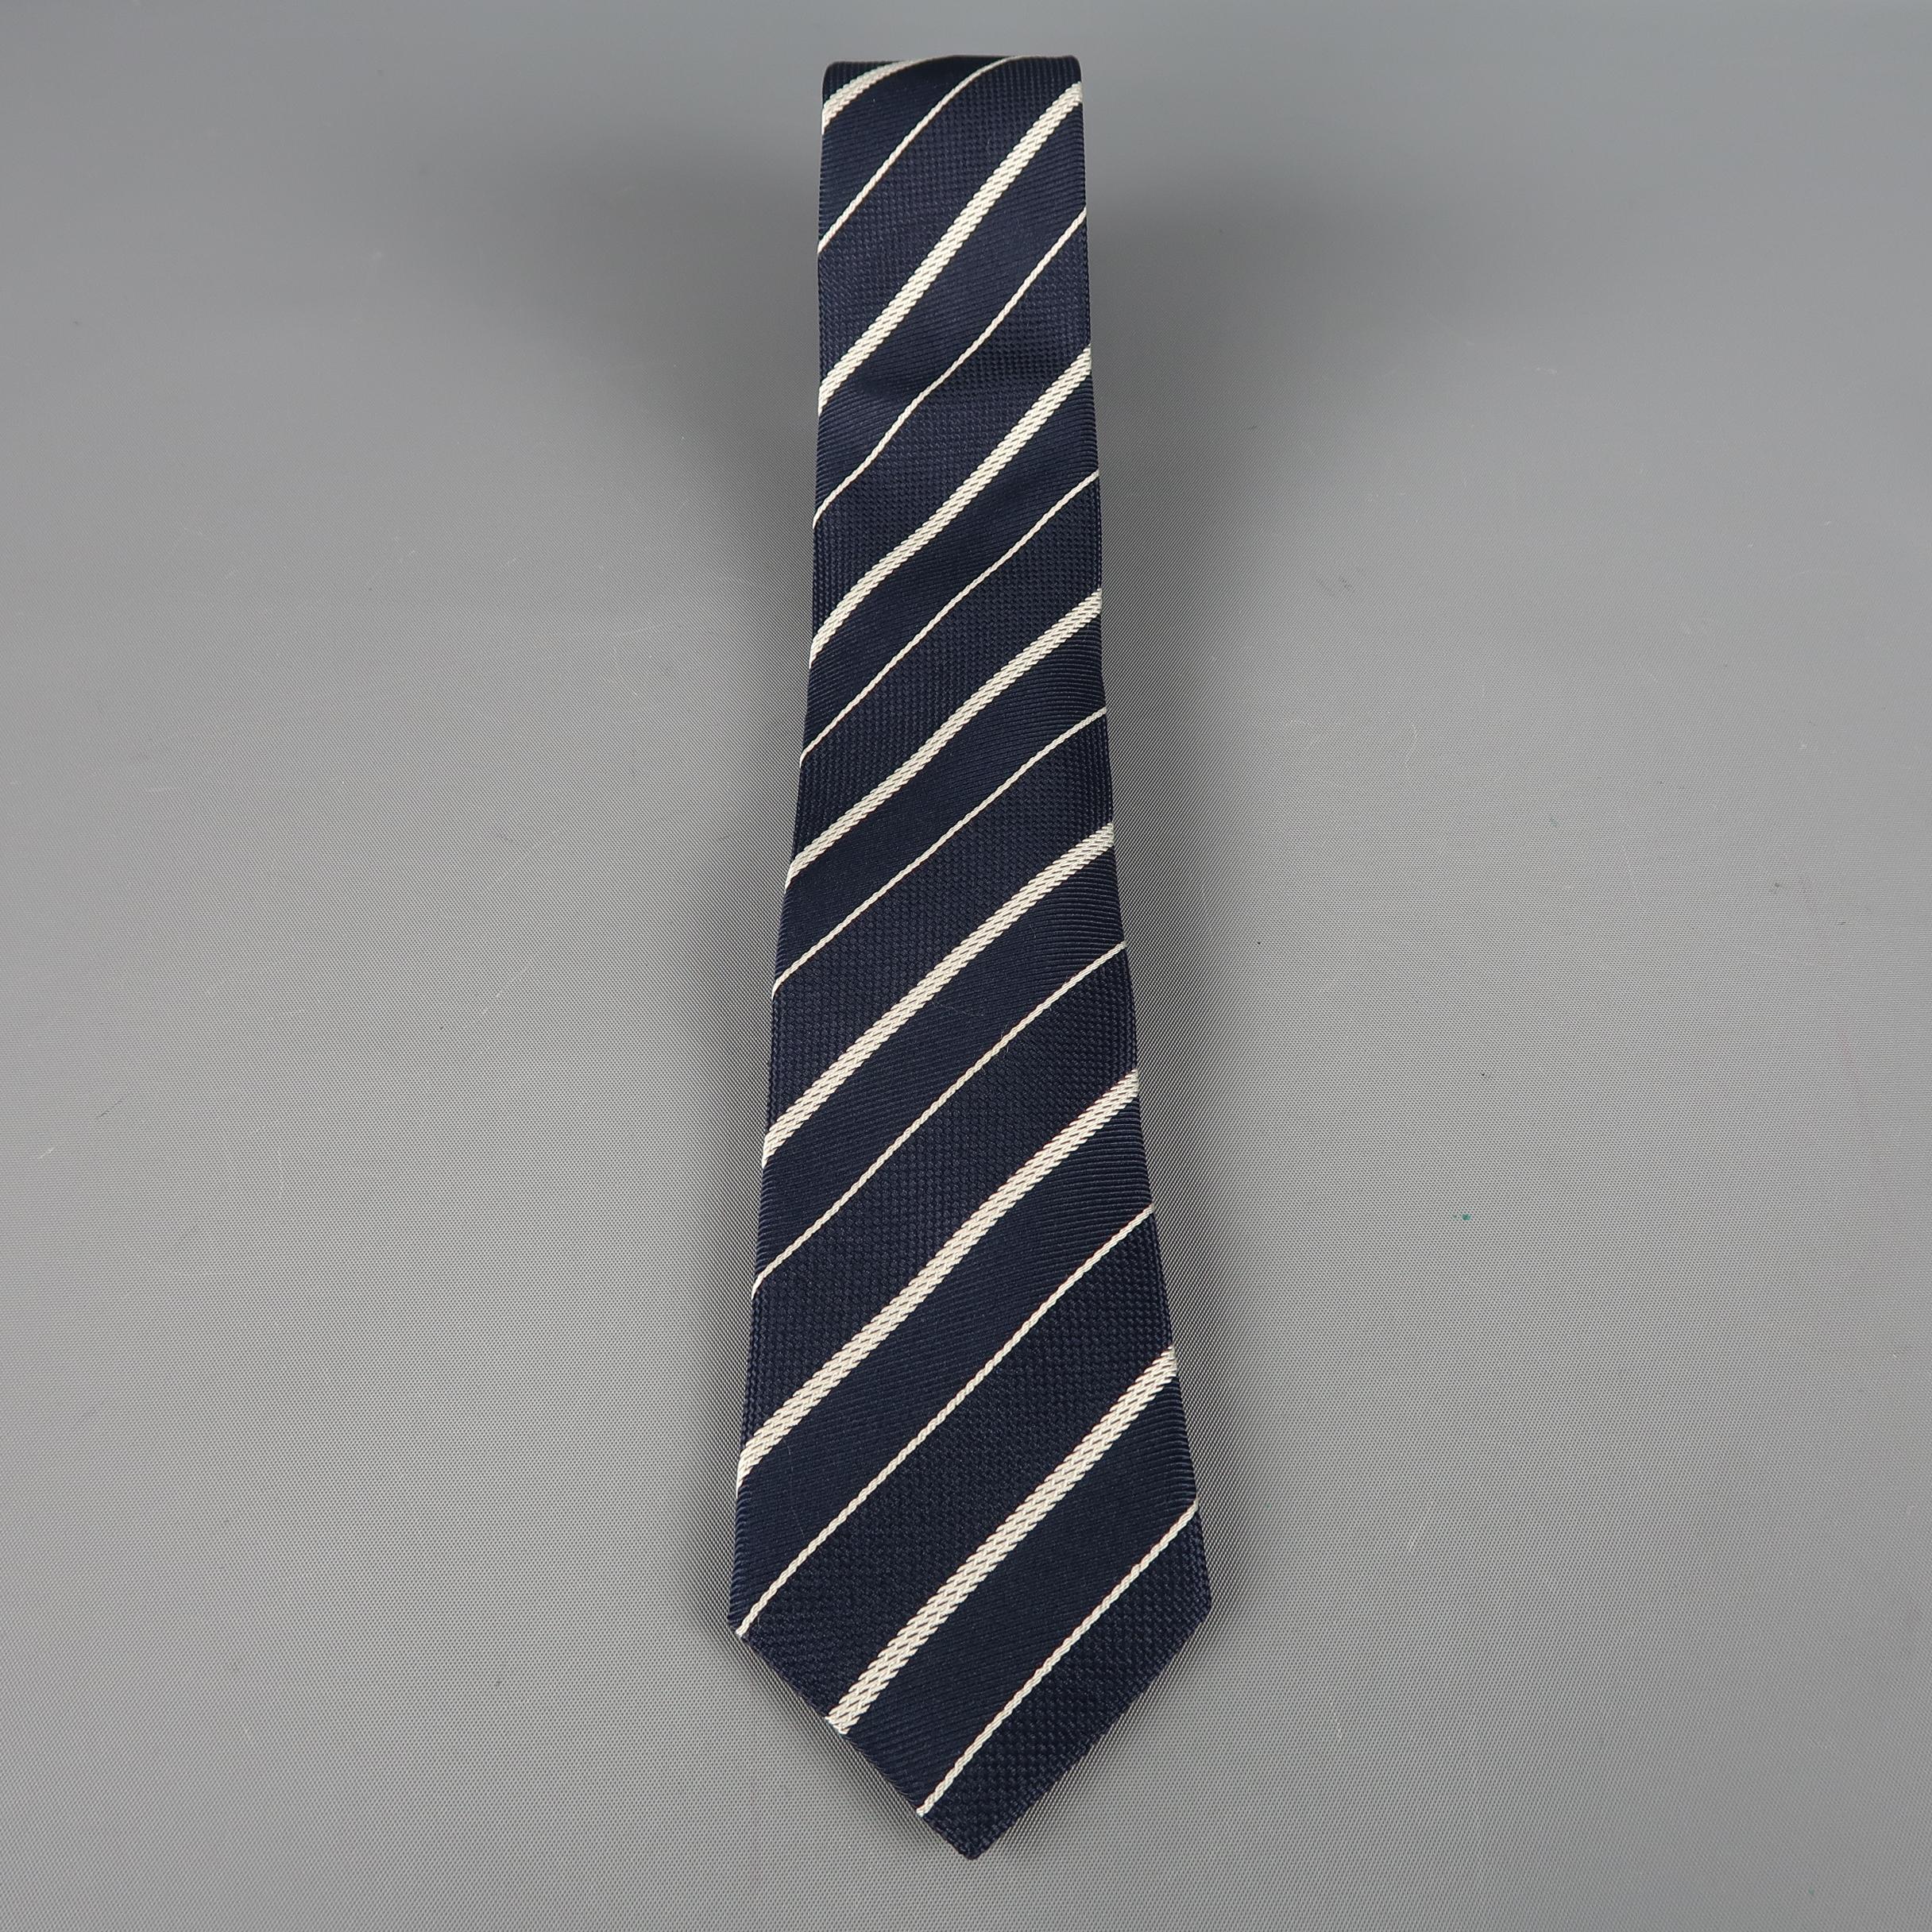 GIORGIO ARMANI tie come in navy silk with all over diagonal silver stripes. Made in Italy.
 
Excellent Pre-Owned Condition.
 
Width: 3 in.